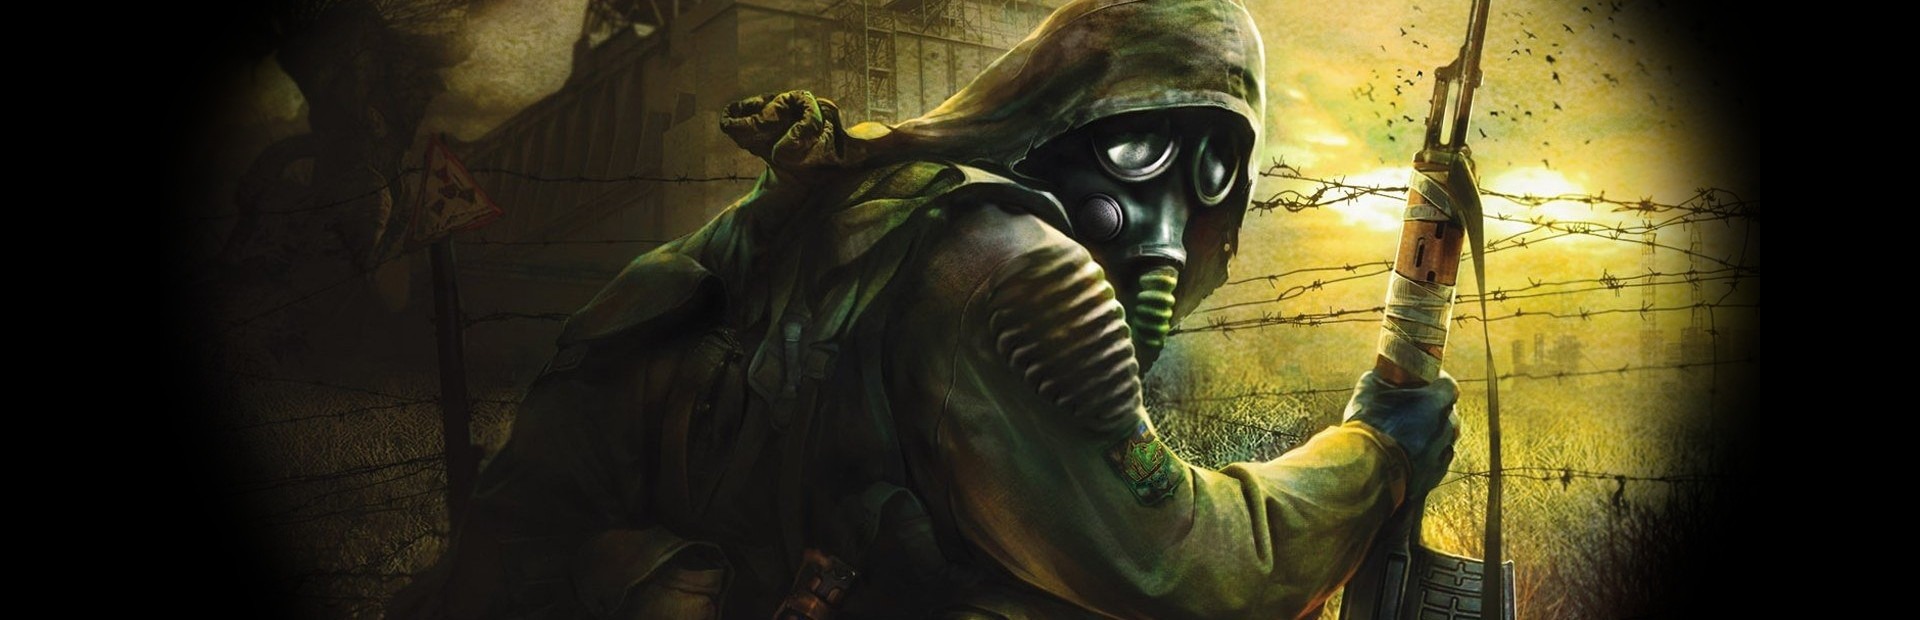 Banner S.T.A.L.K.E.R.: Shadow of Chernobyl